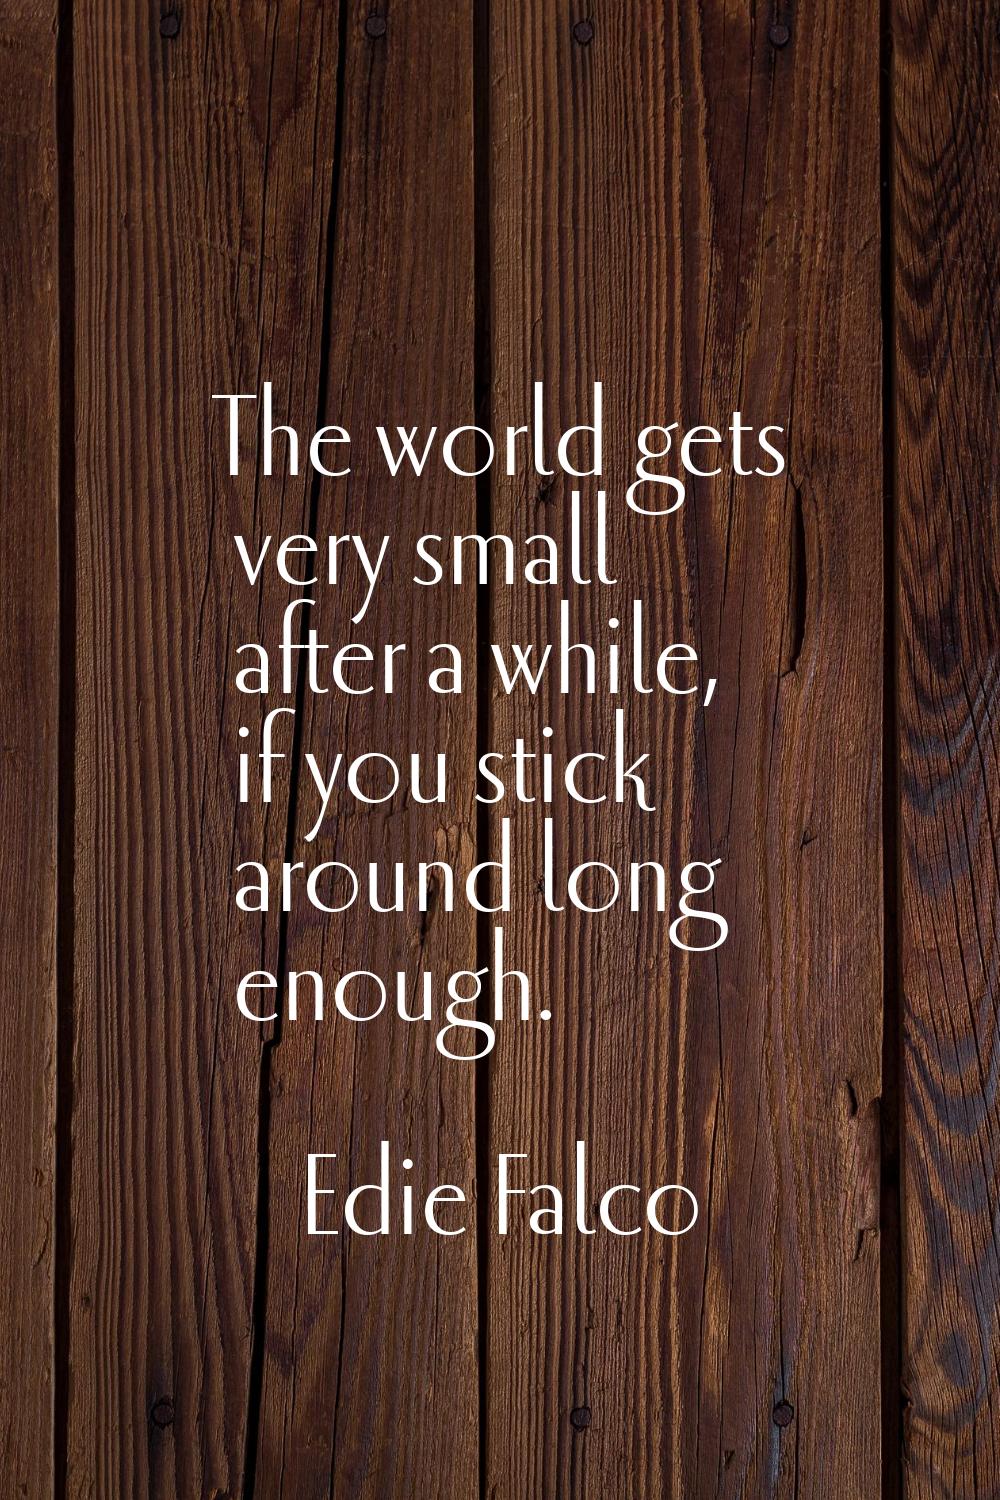 The world gets very small after a while, if you stick around long enough.